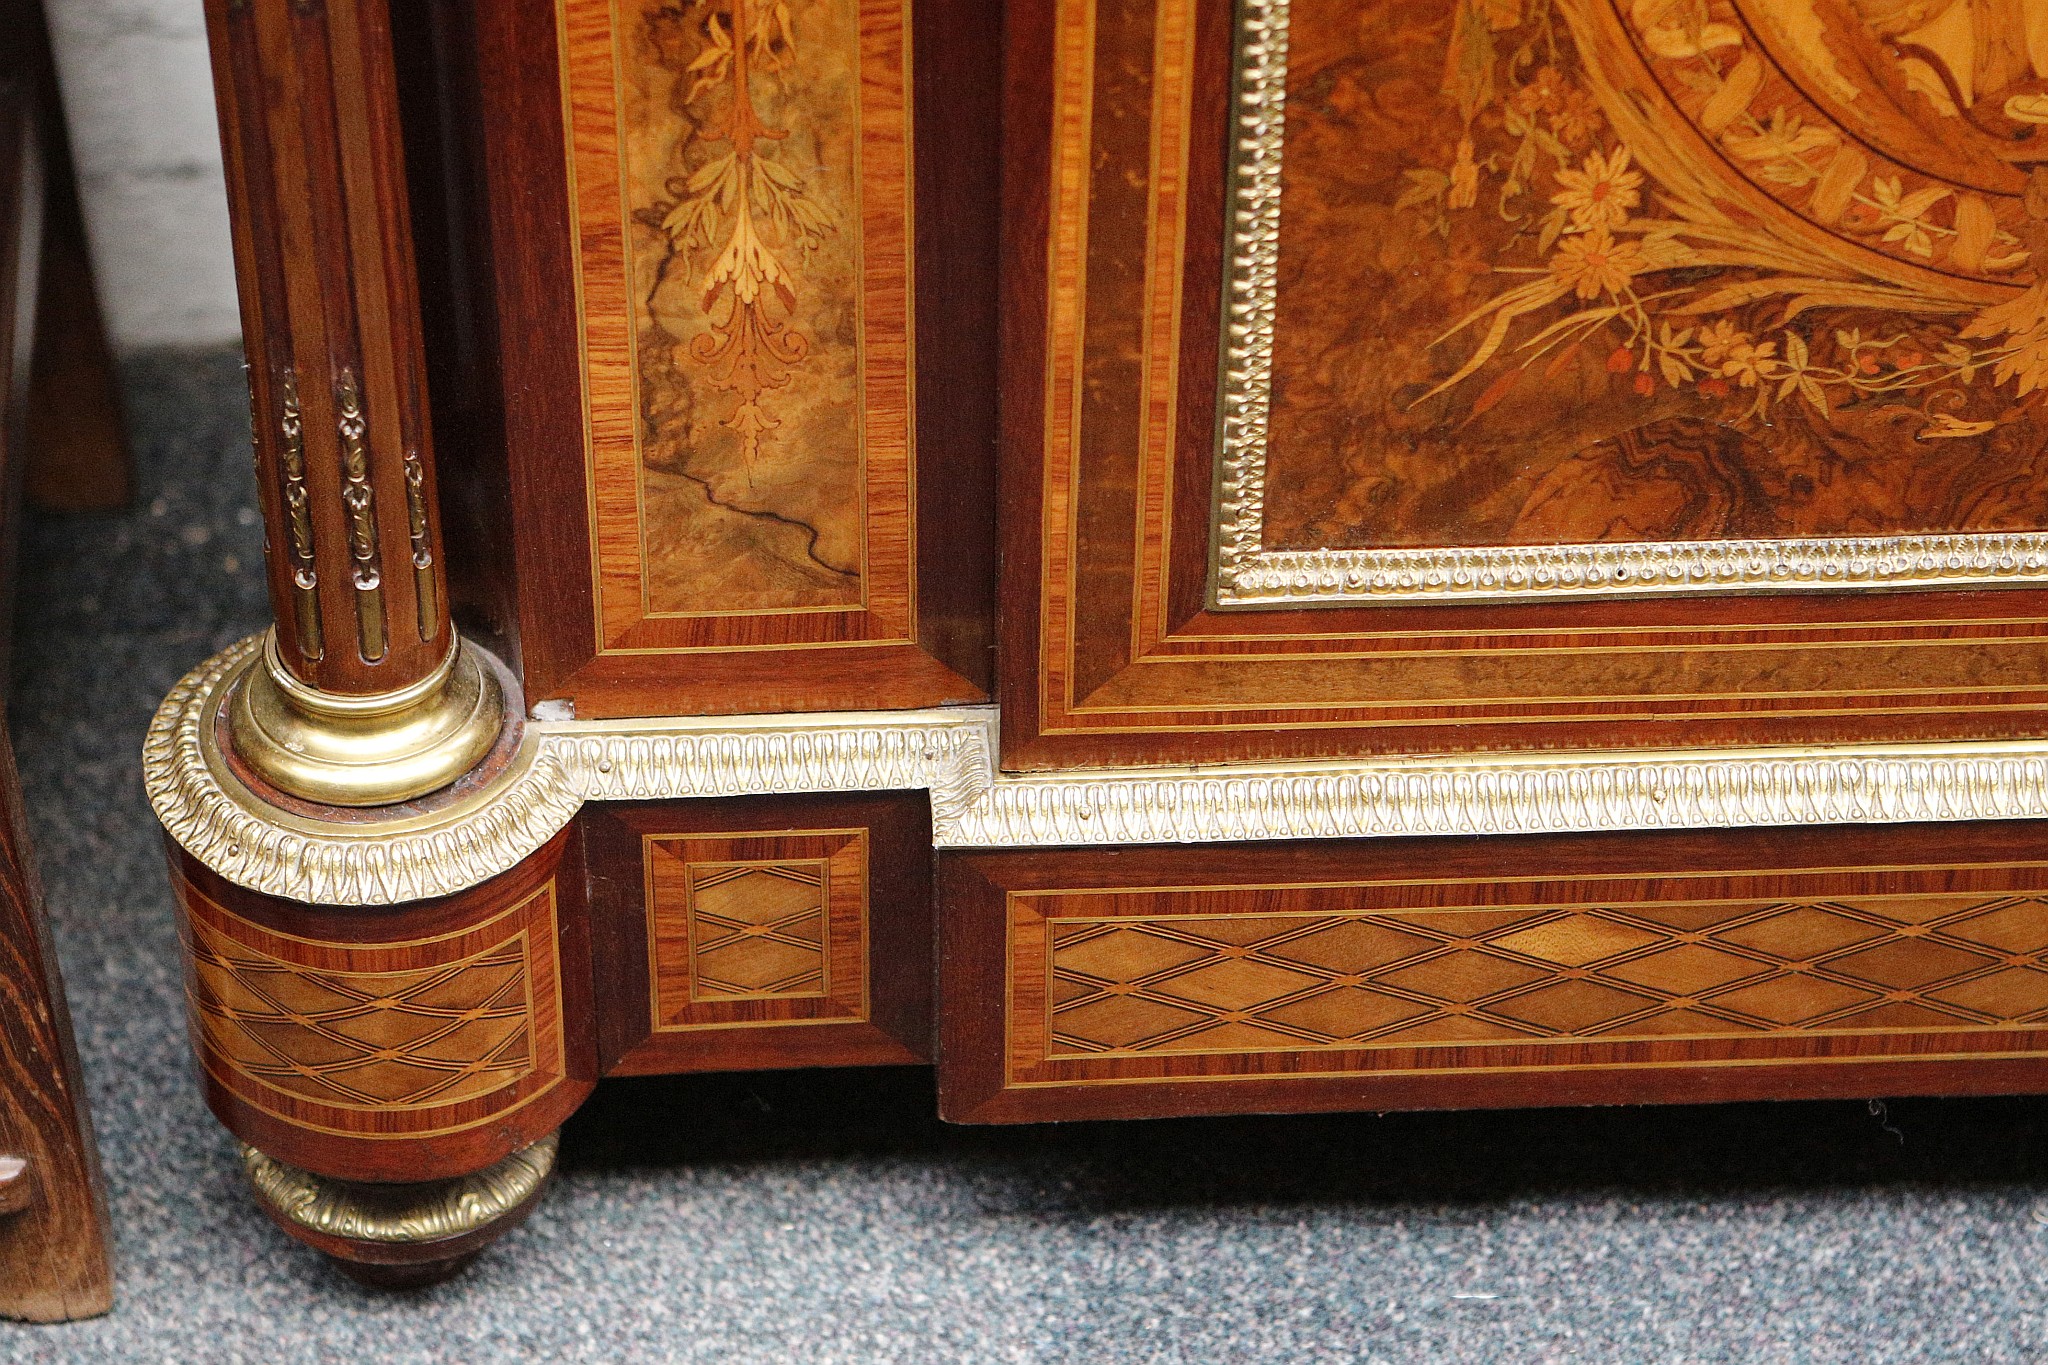 A fine 19th century ormolu mounted, marble topped pier cabinet, the front and sides profusely - Image 4 of 7